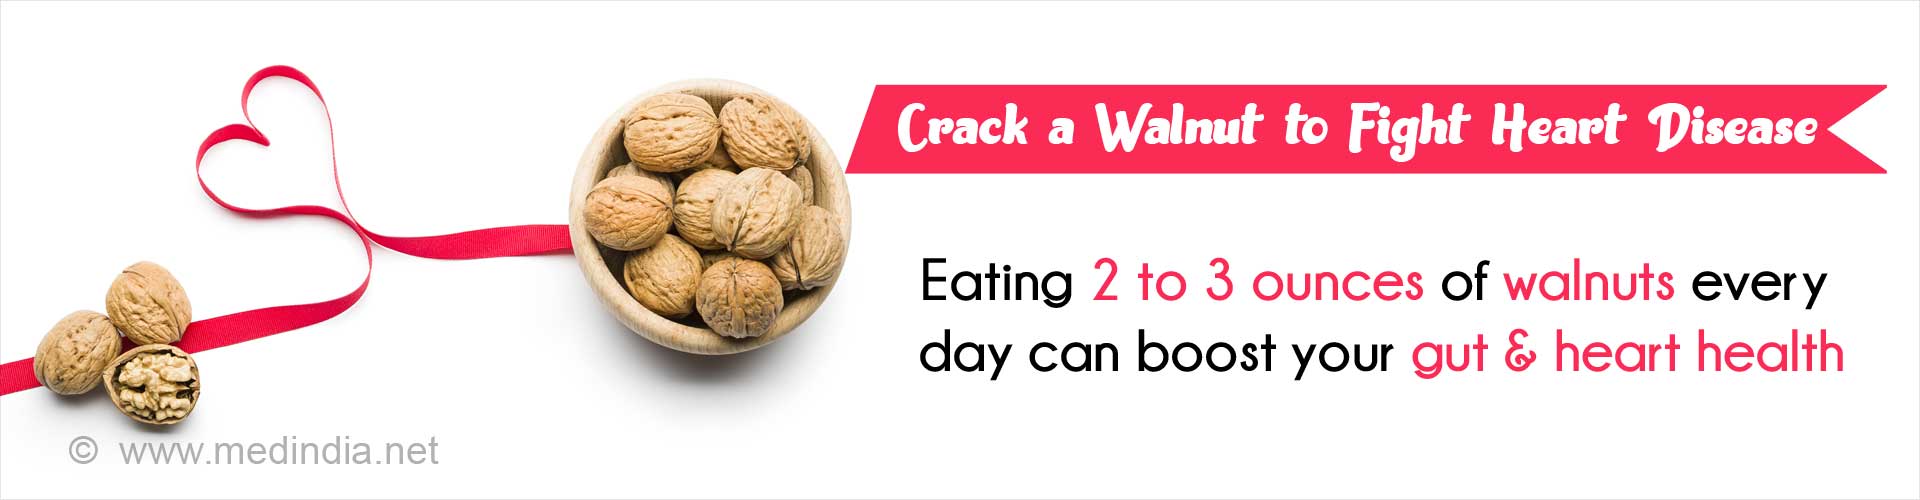 Crack a walnut to fight heart disease. Eating 2 to 3 ounces of walnuts every day can boost your gut and heart health.